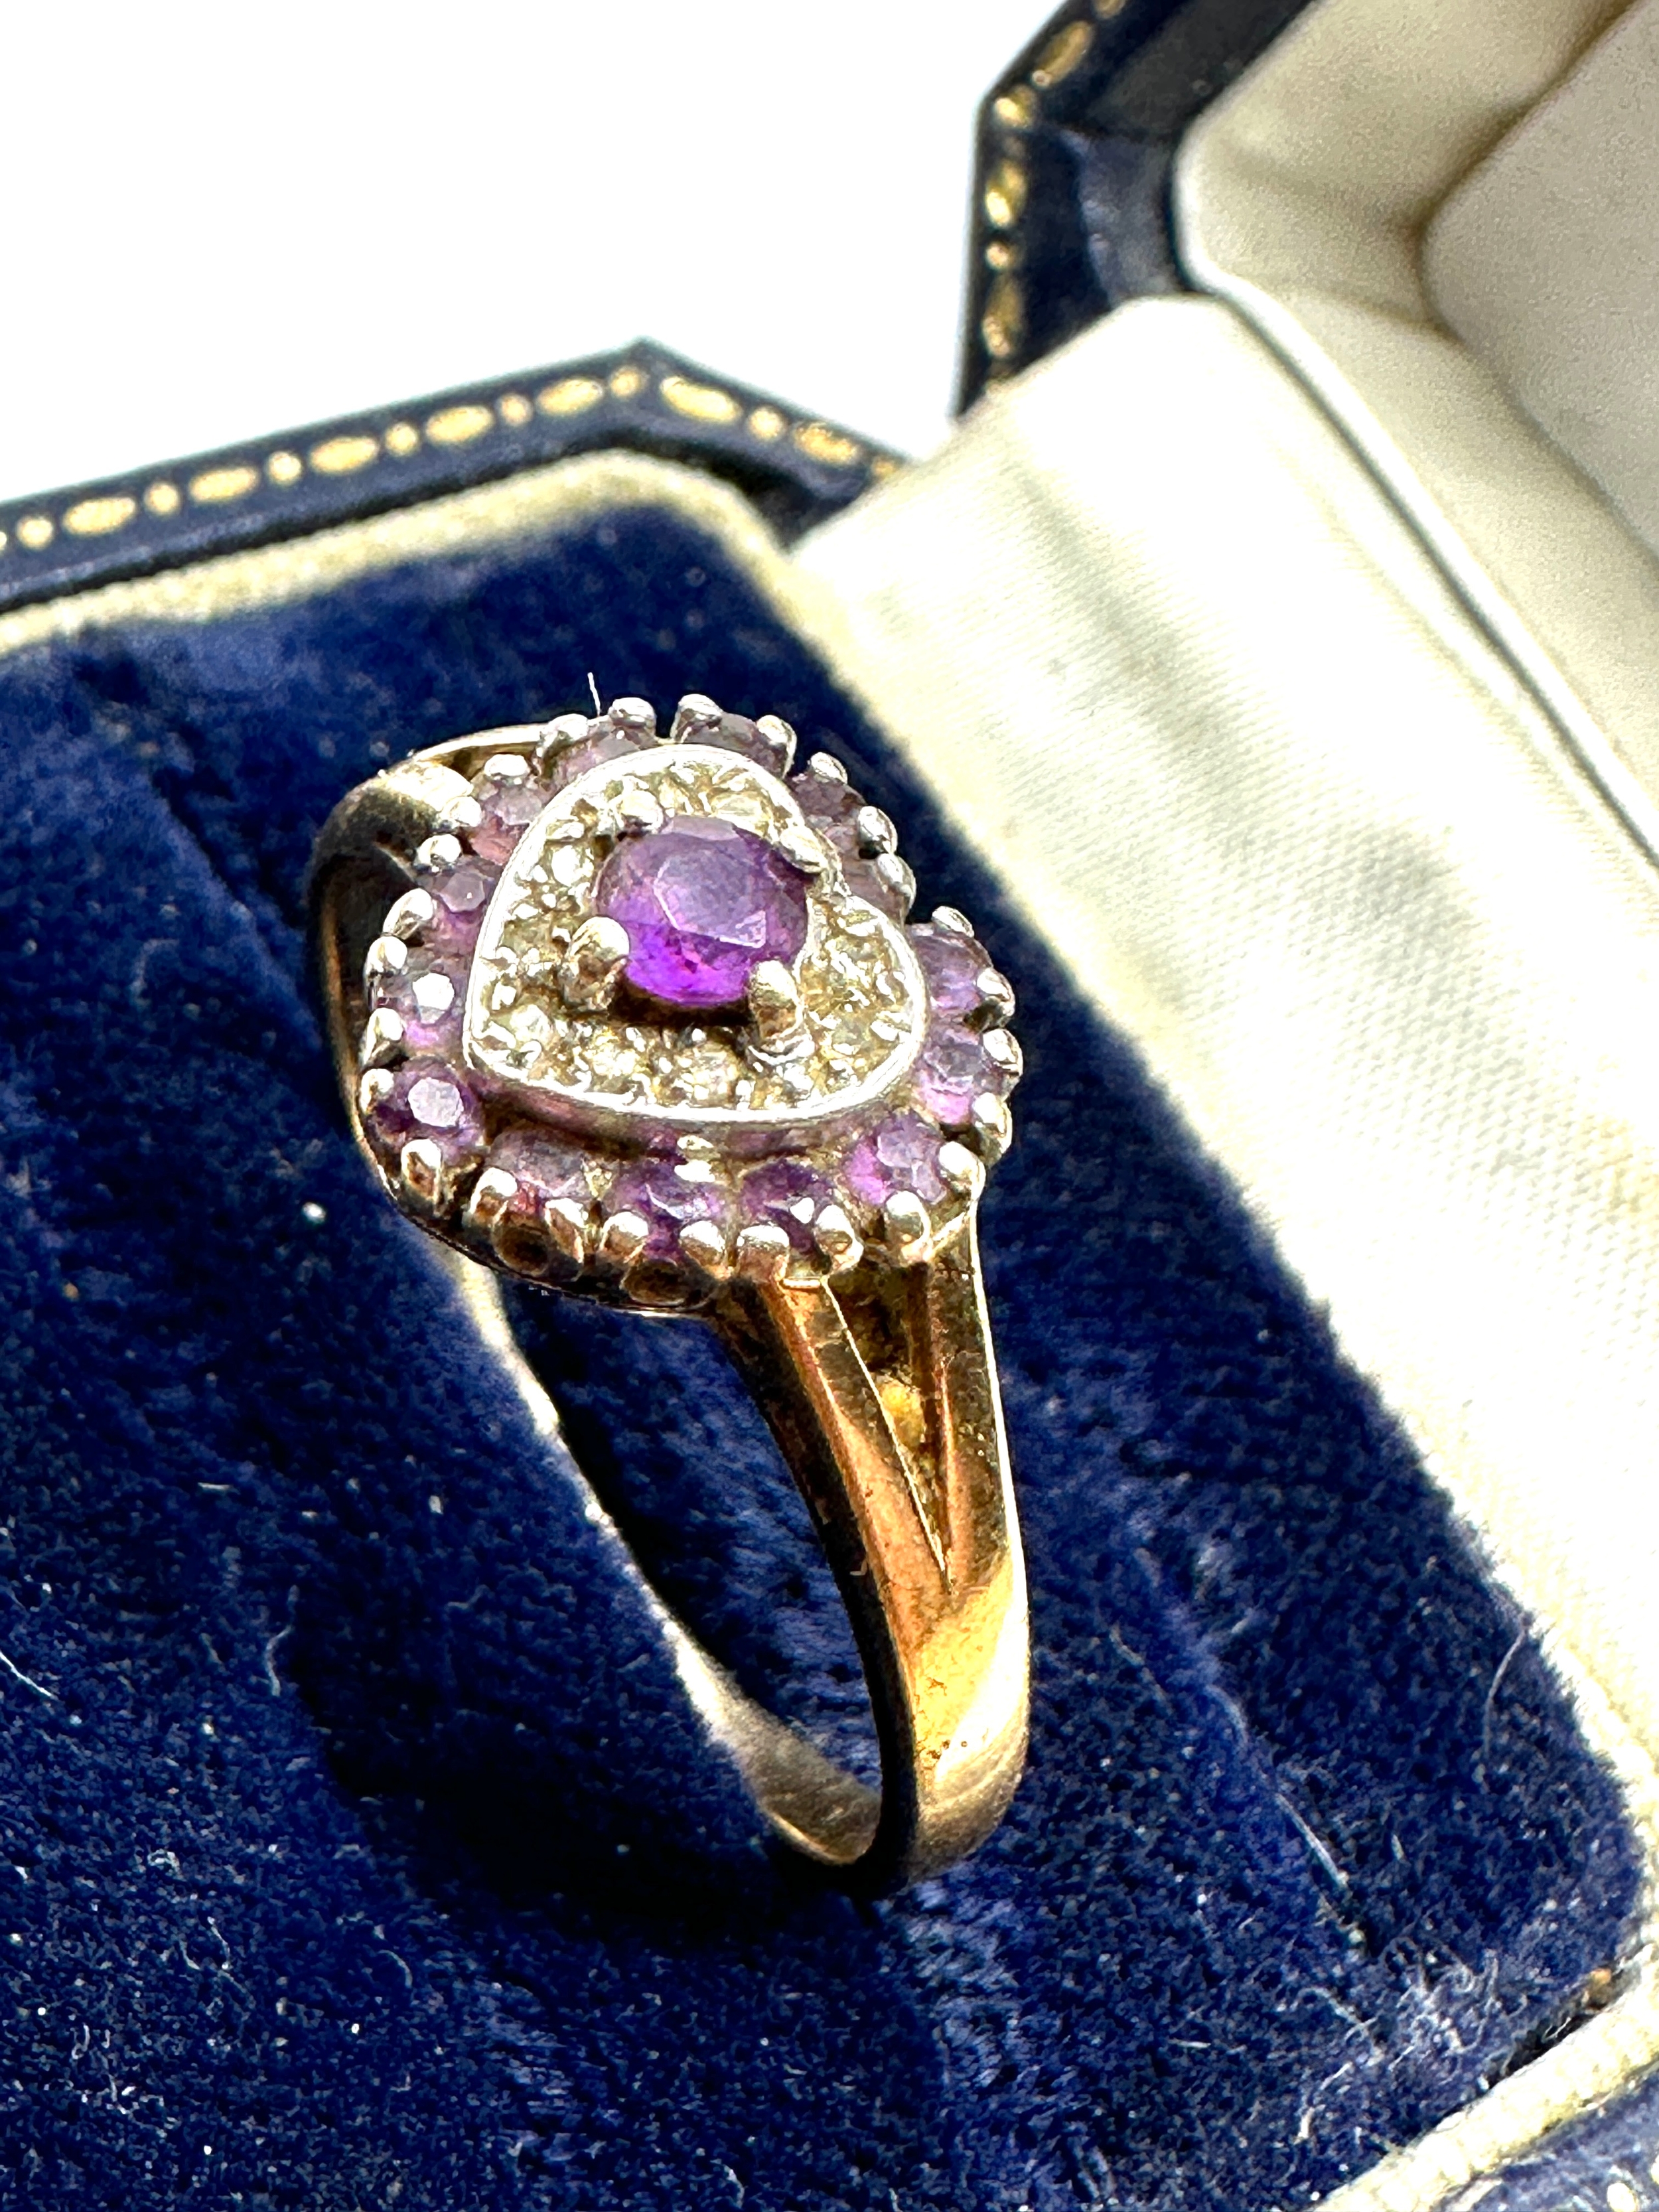 9ct gold diamond & amethyst heart ring weight 3g - Image 3 of 4